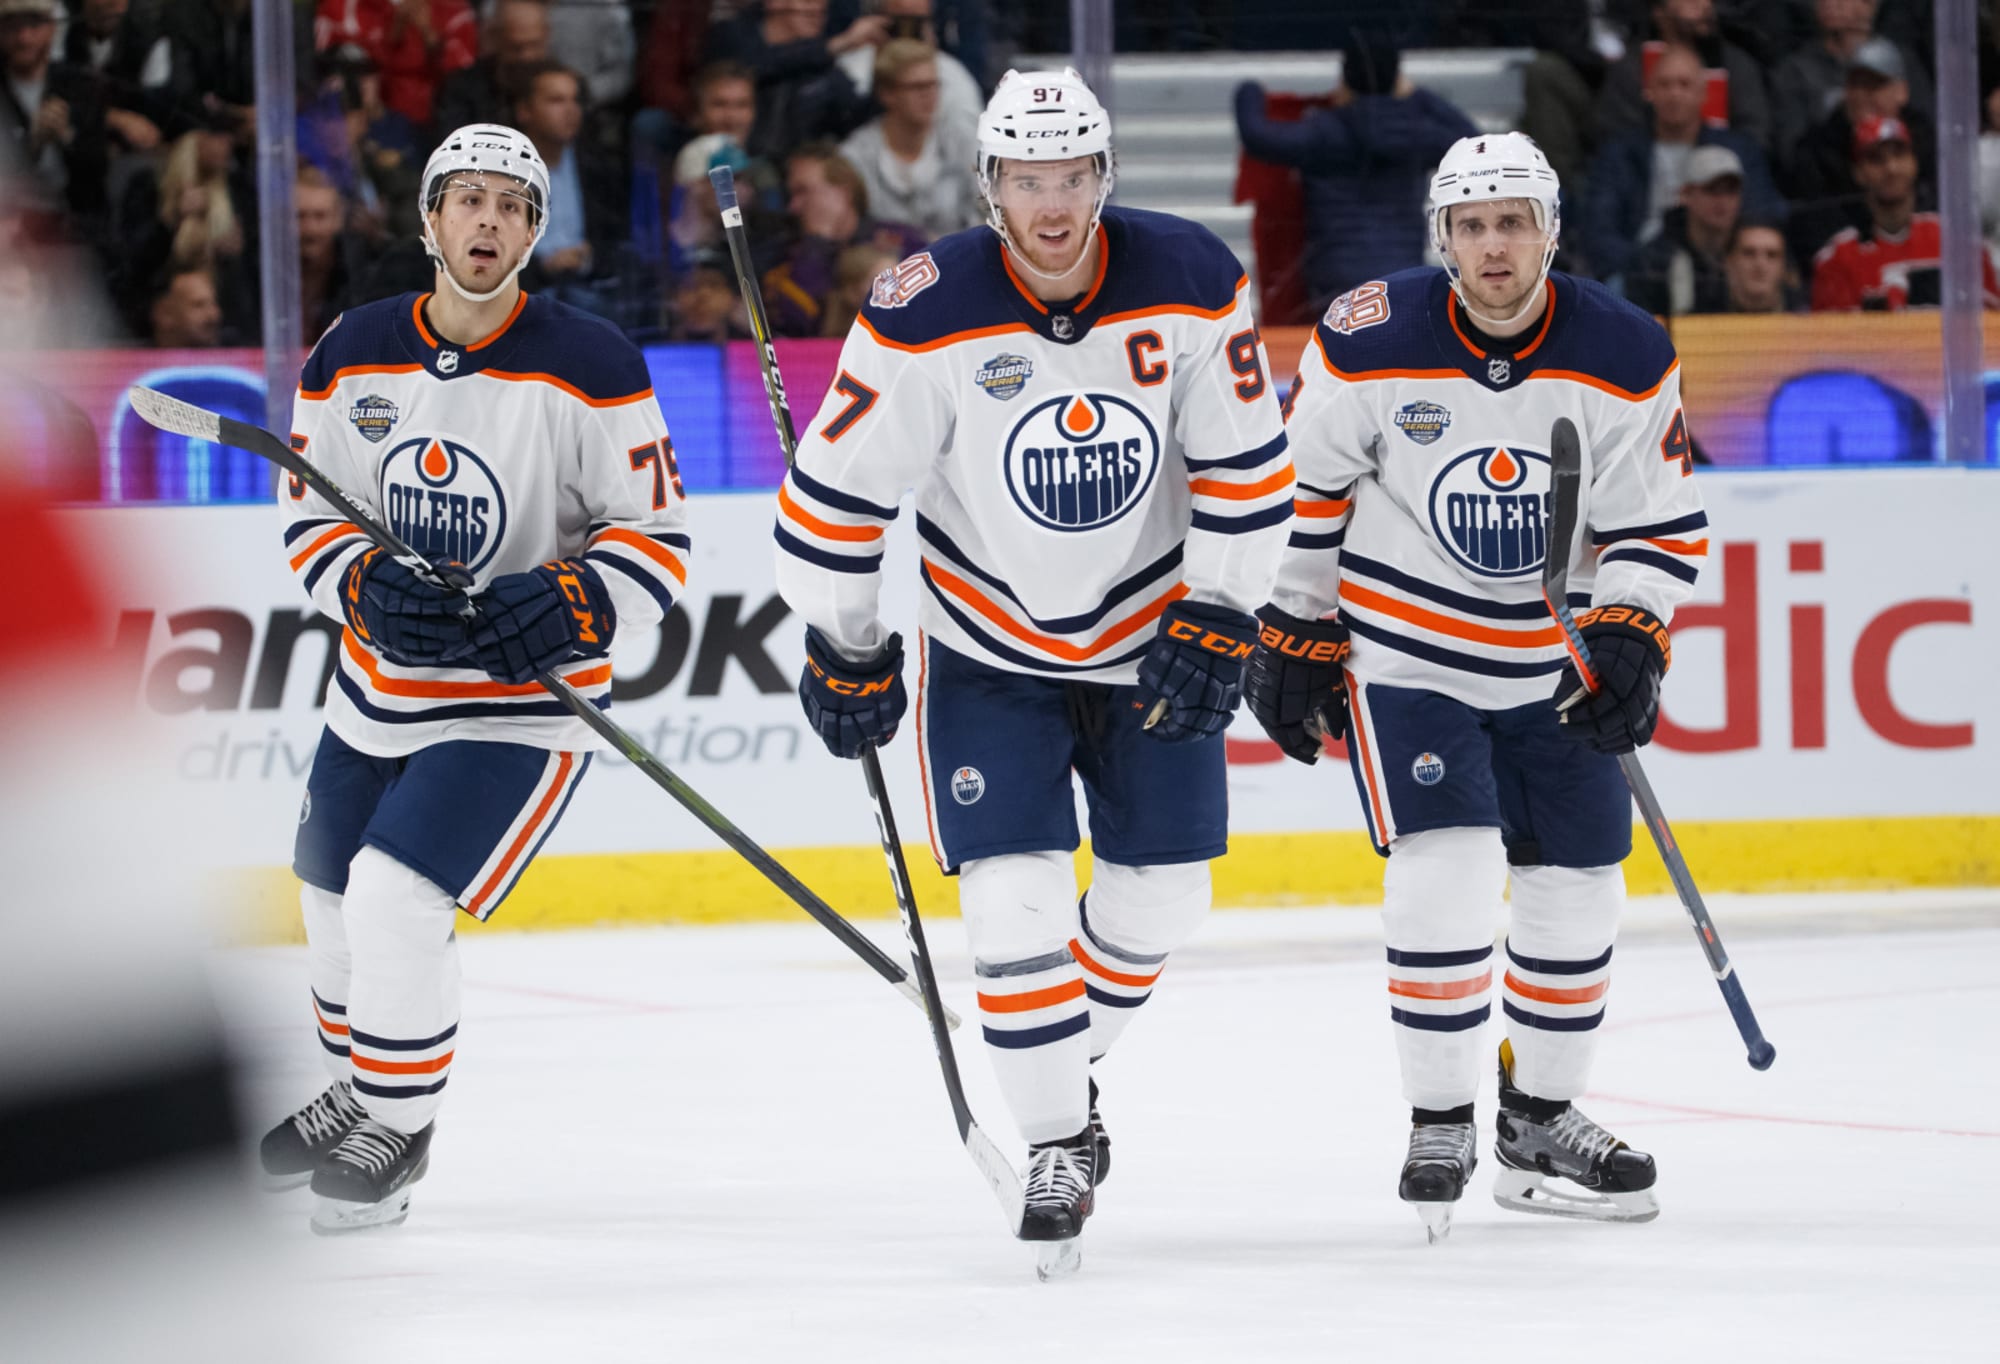 Breaking News: Oilers Game Update - Find Out Who Is Winning Now!